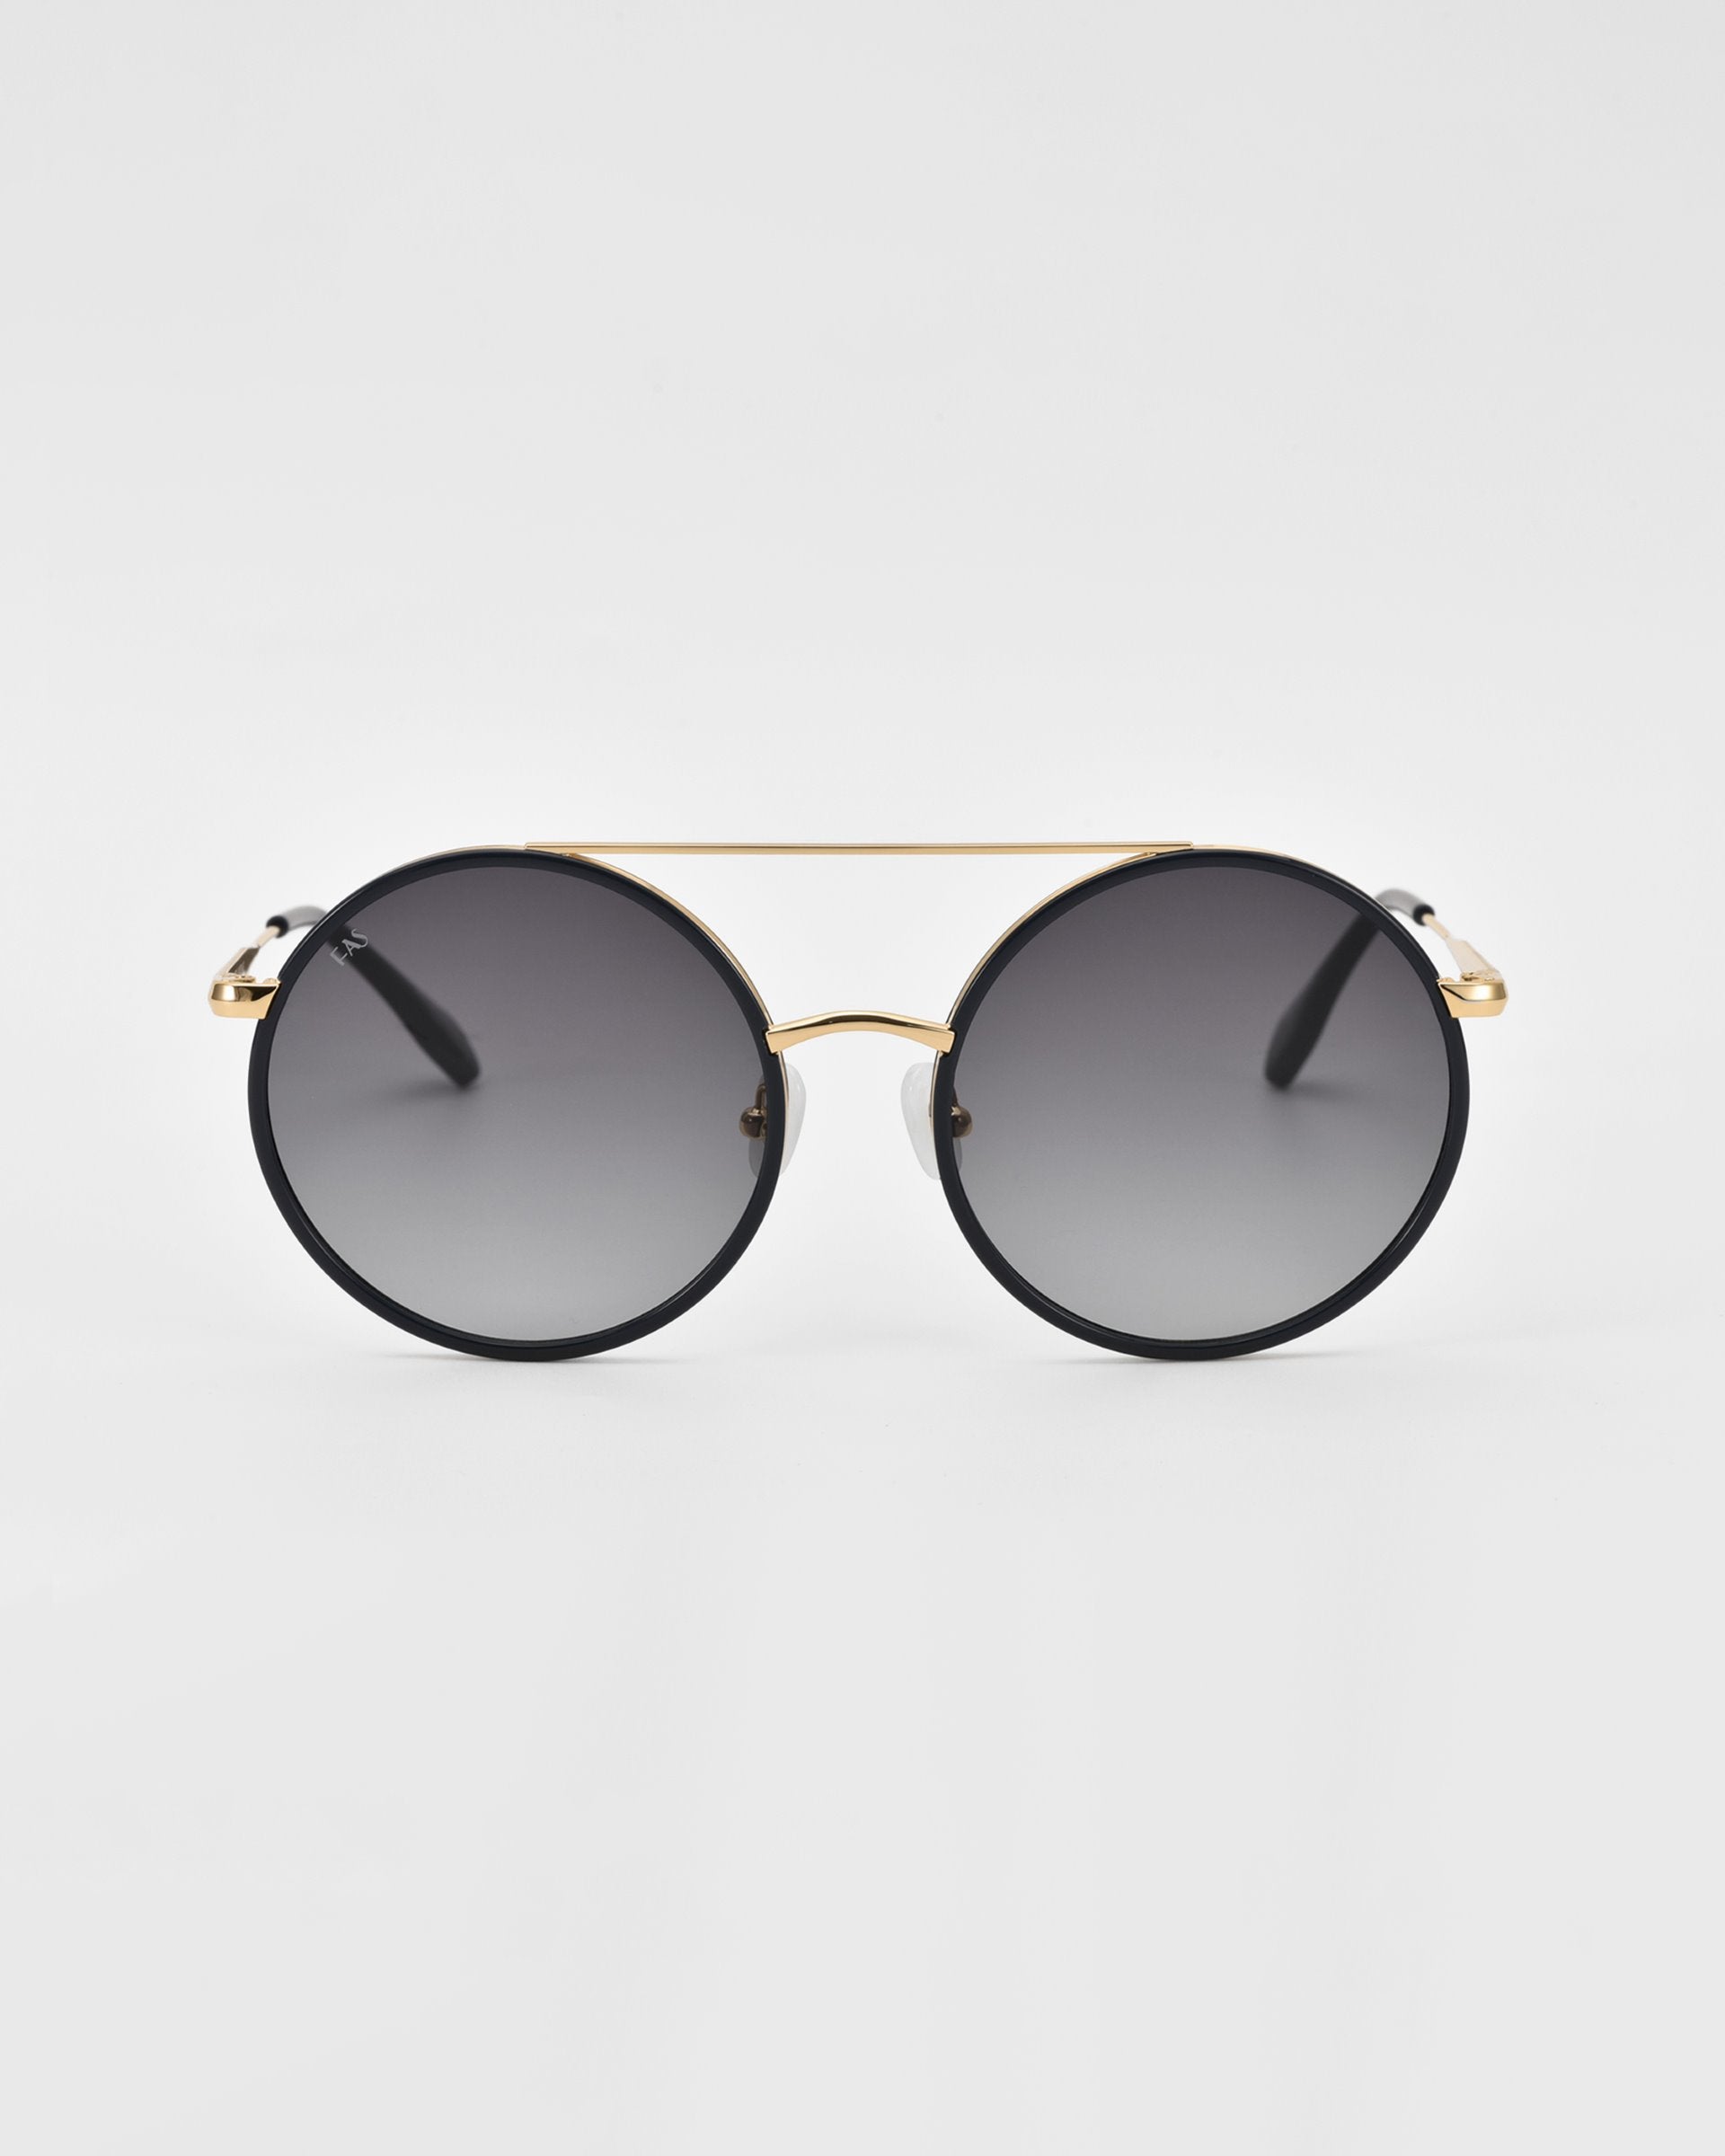 A pair of For Art's Sake® Orb oversized round aviator sunglasses with dark gradient lenses and a thin gold frame. The design features a distinct double bridge and black arms with gold accents at the hinges, complemented by jade-stone nose pads. The background is plain white, highlighting the stylish and modern design.